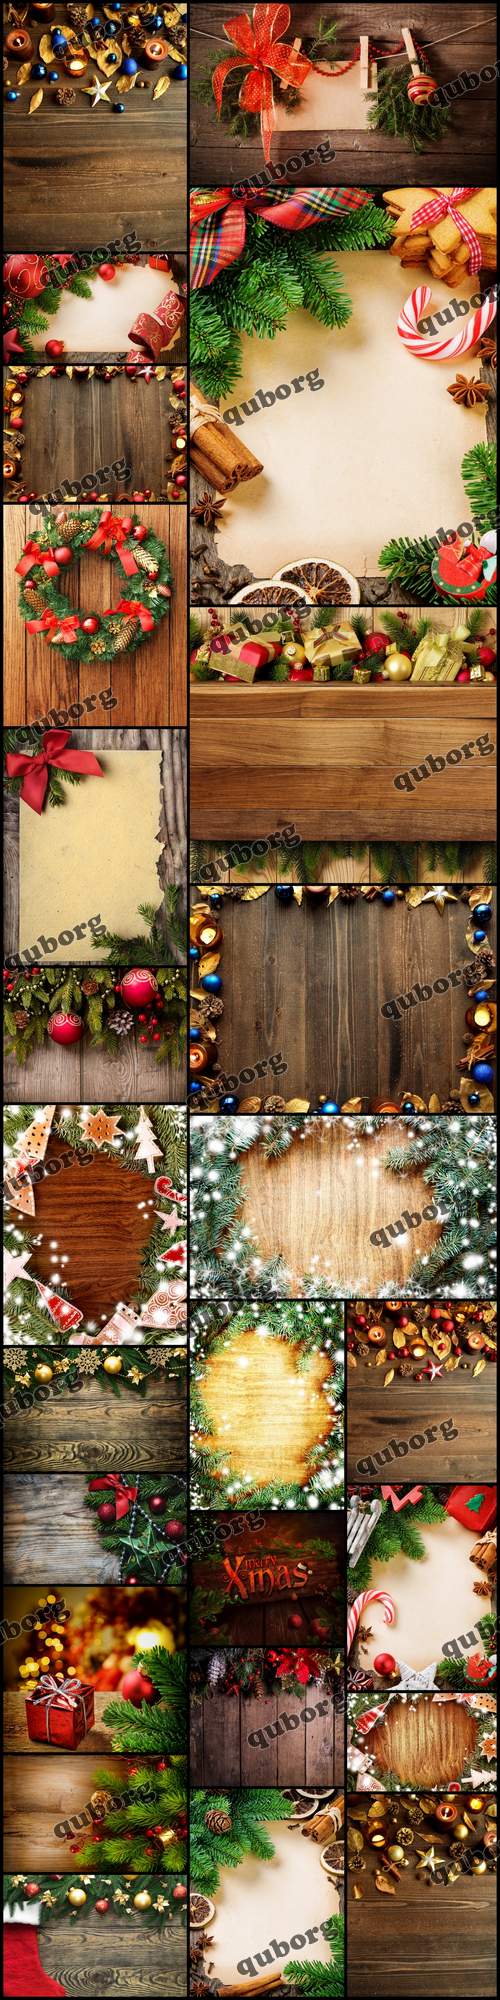 Stock Photos - Christmas, New Year Decorations on Wooden Background